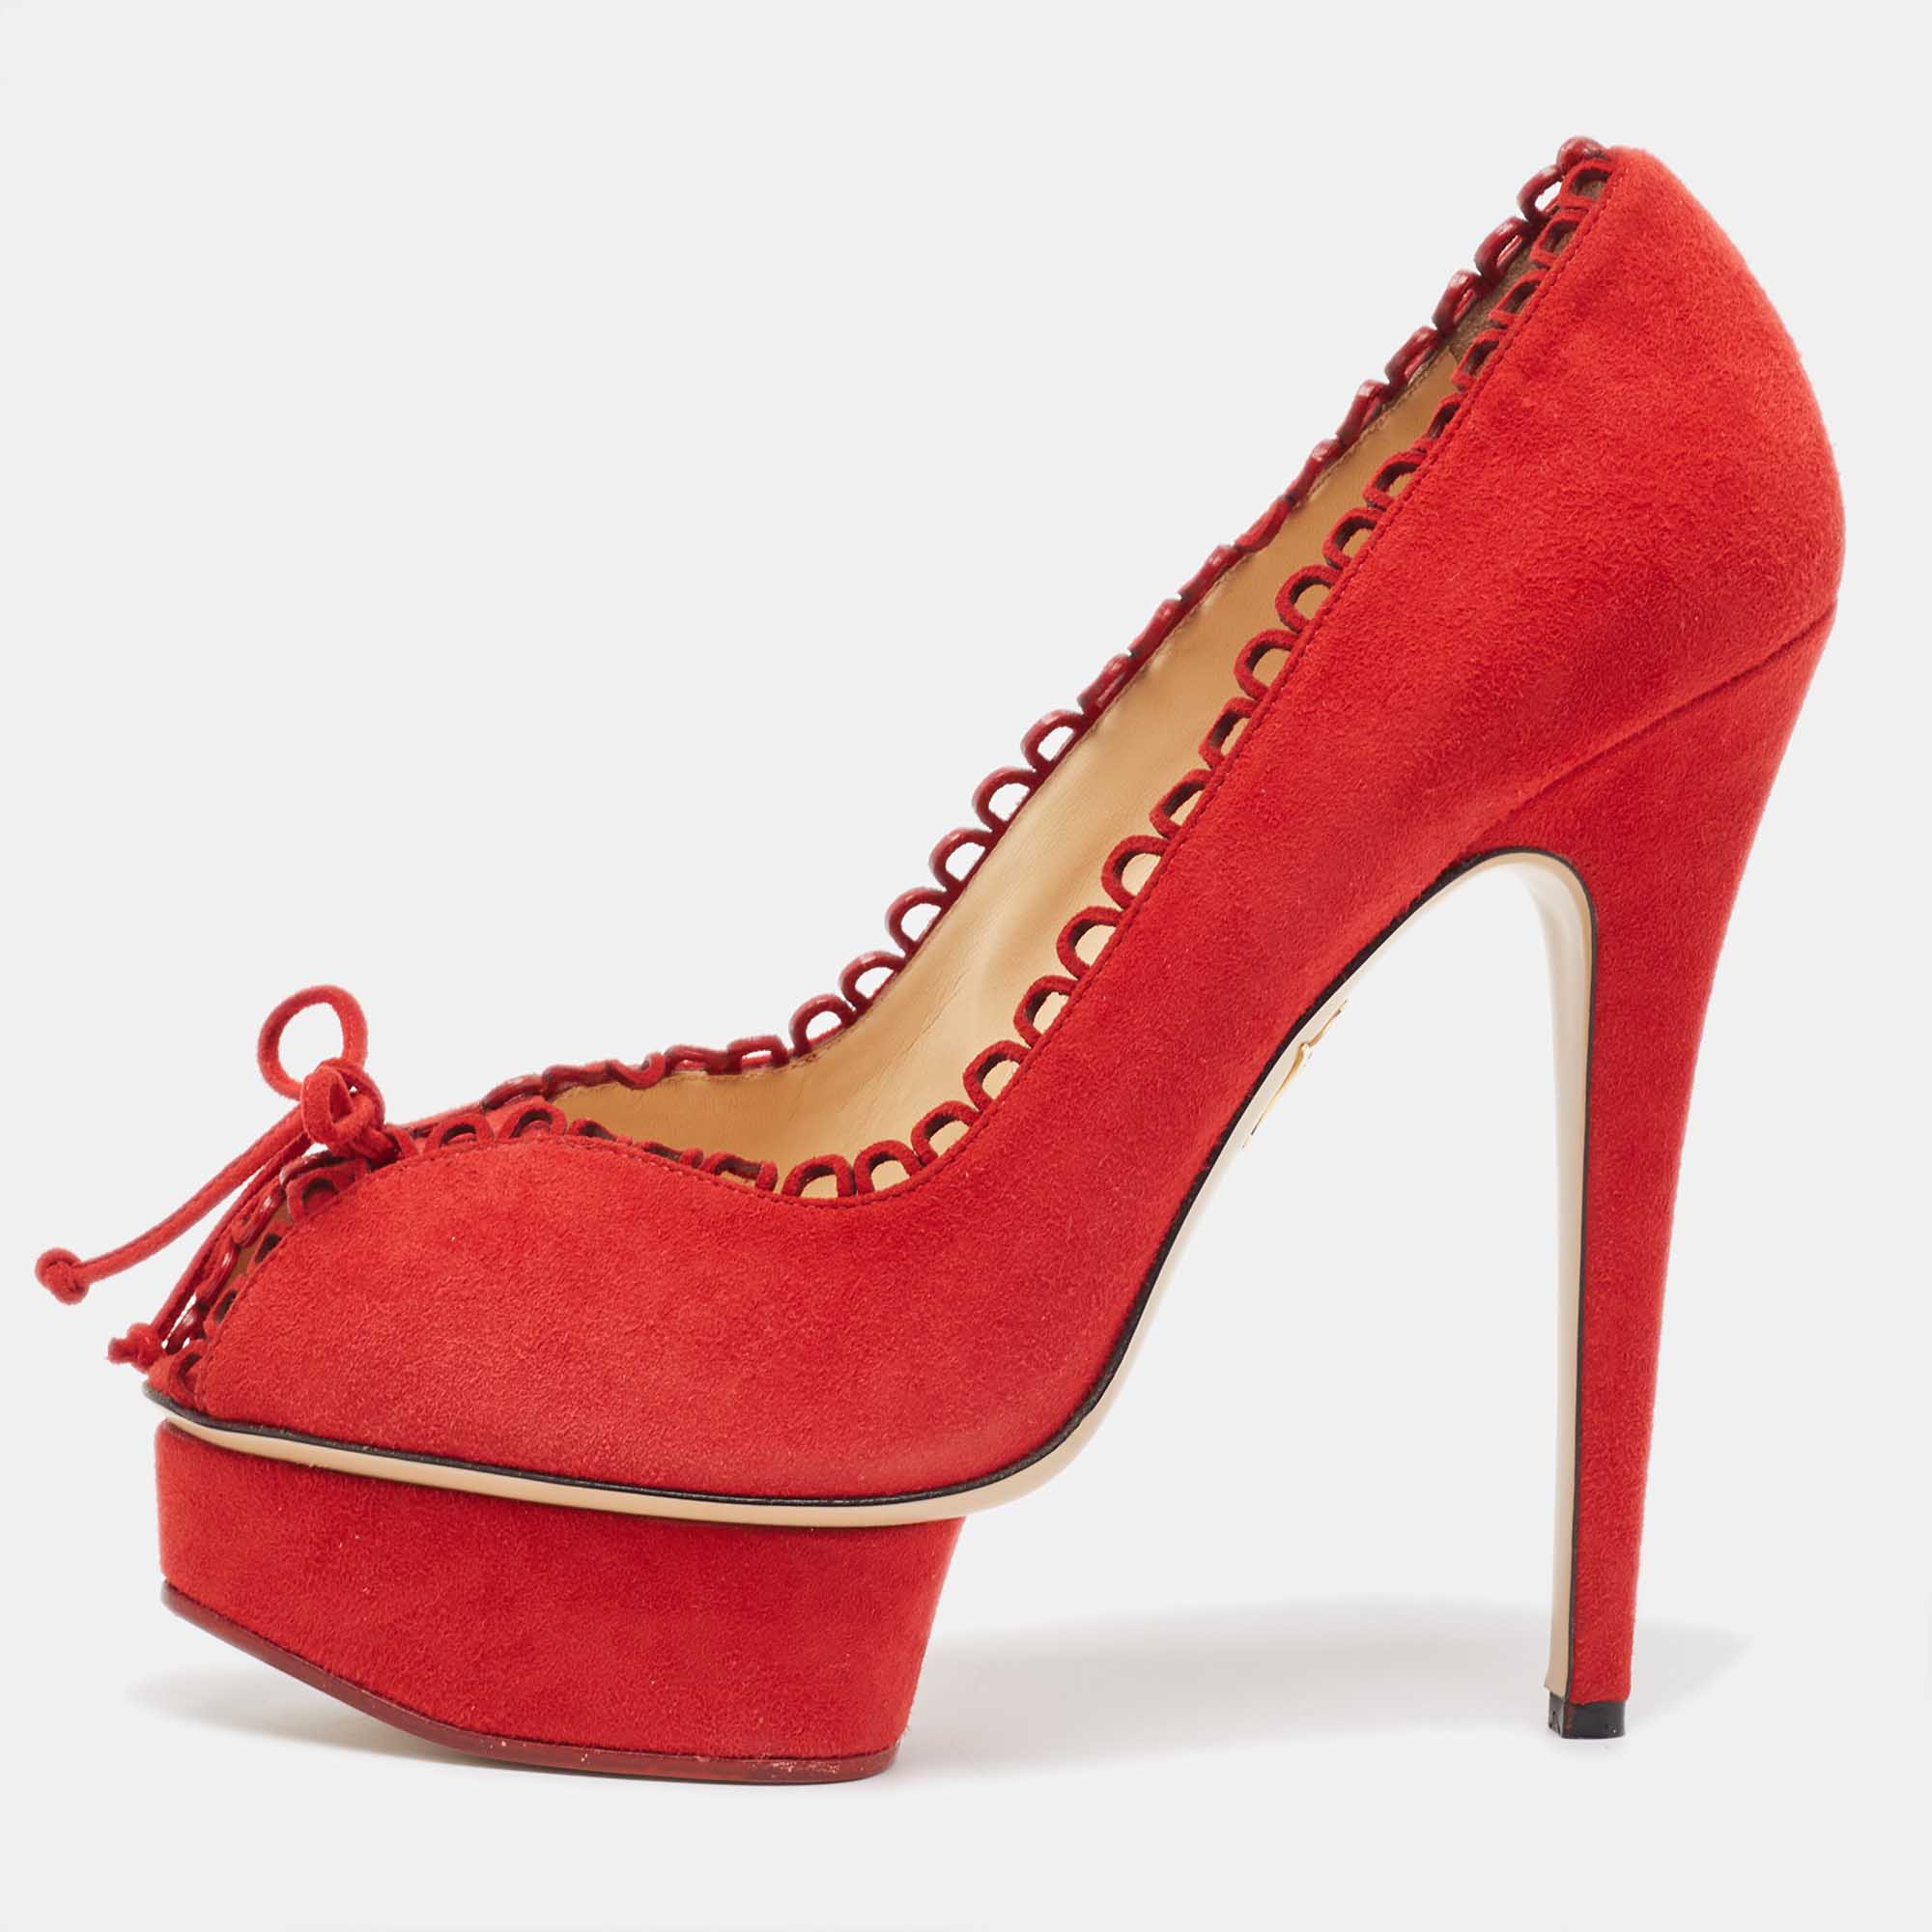 Charlotte olympia red suede daphne scalloped trim peep toe platform pumps size 40.5